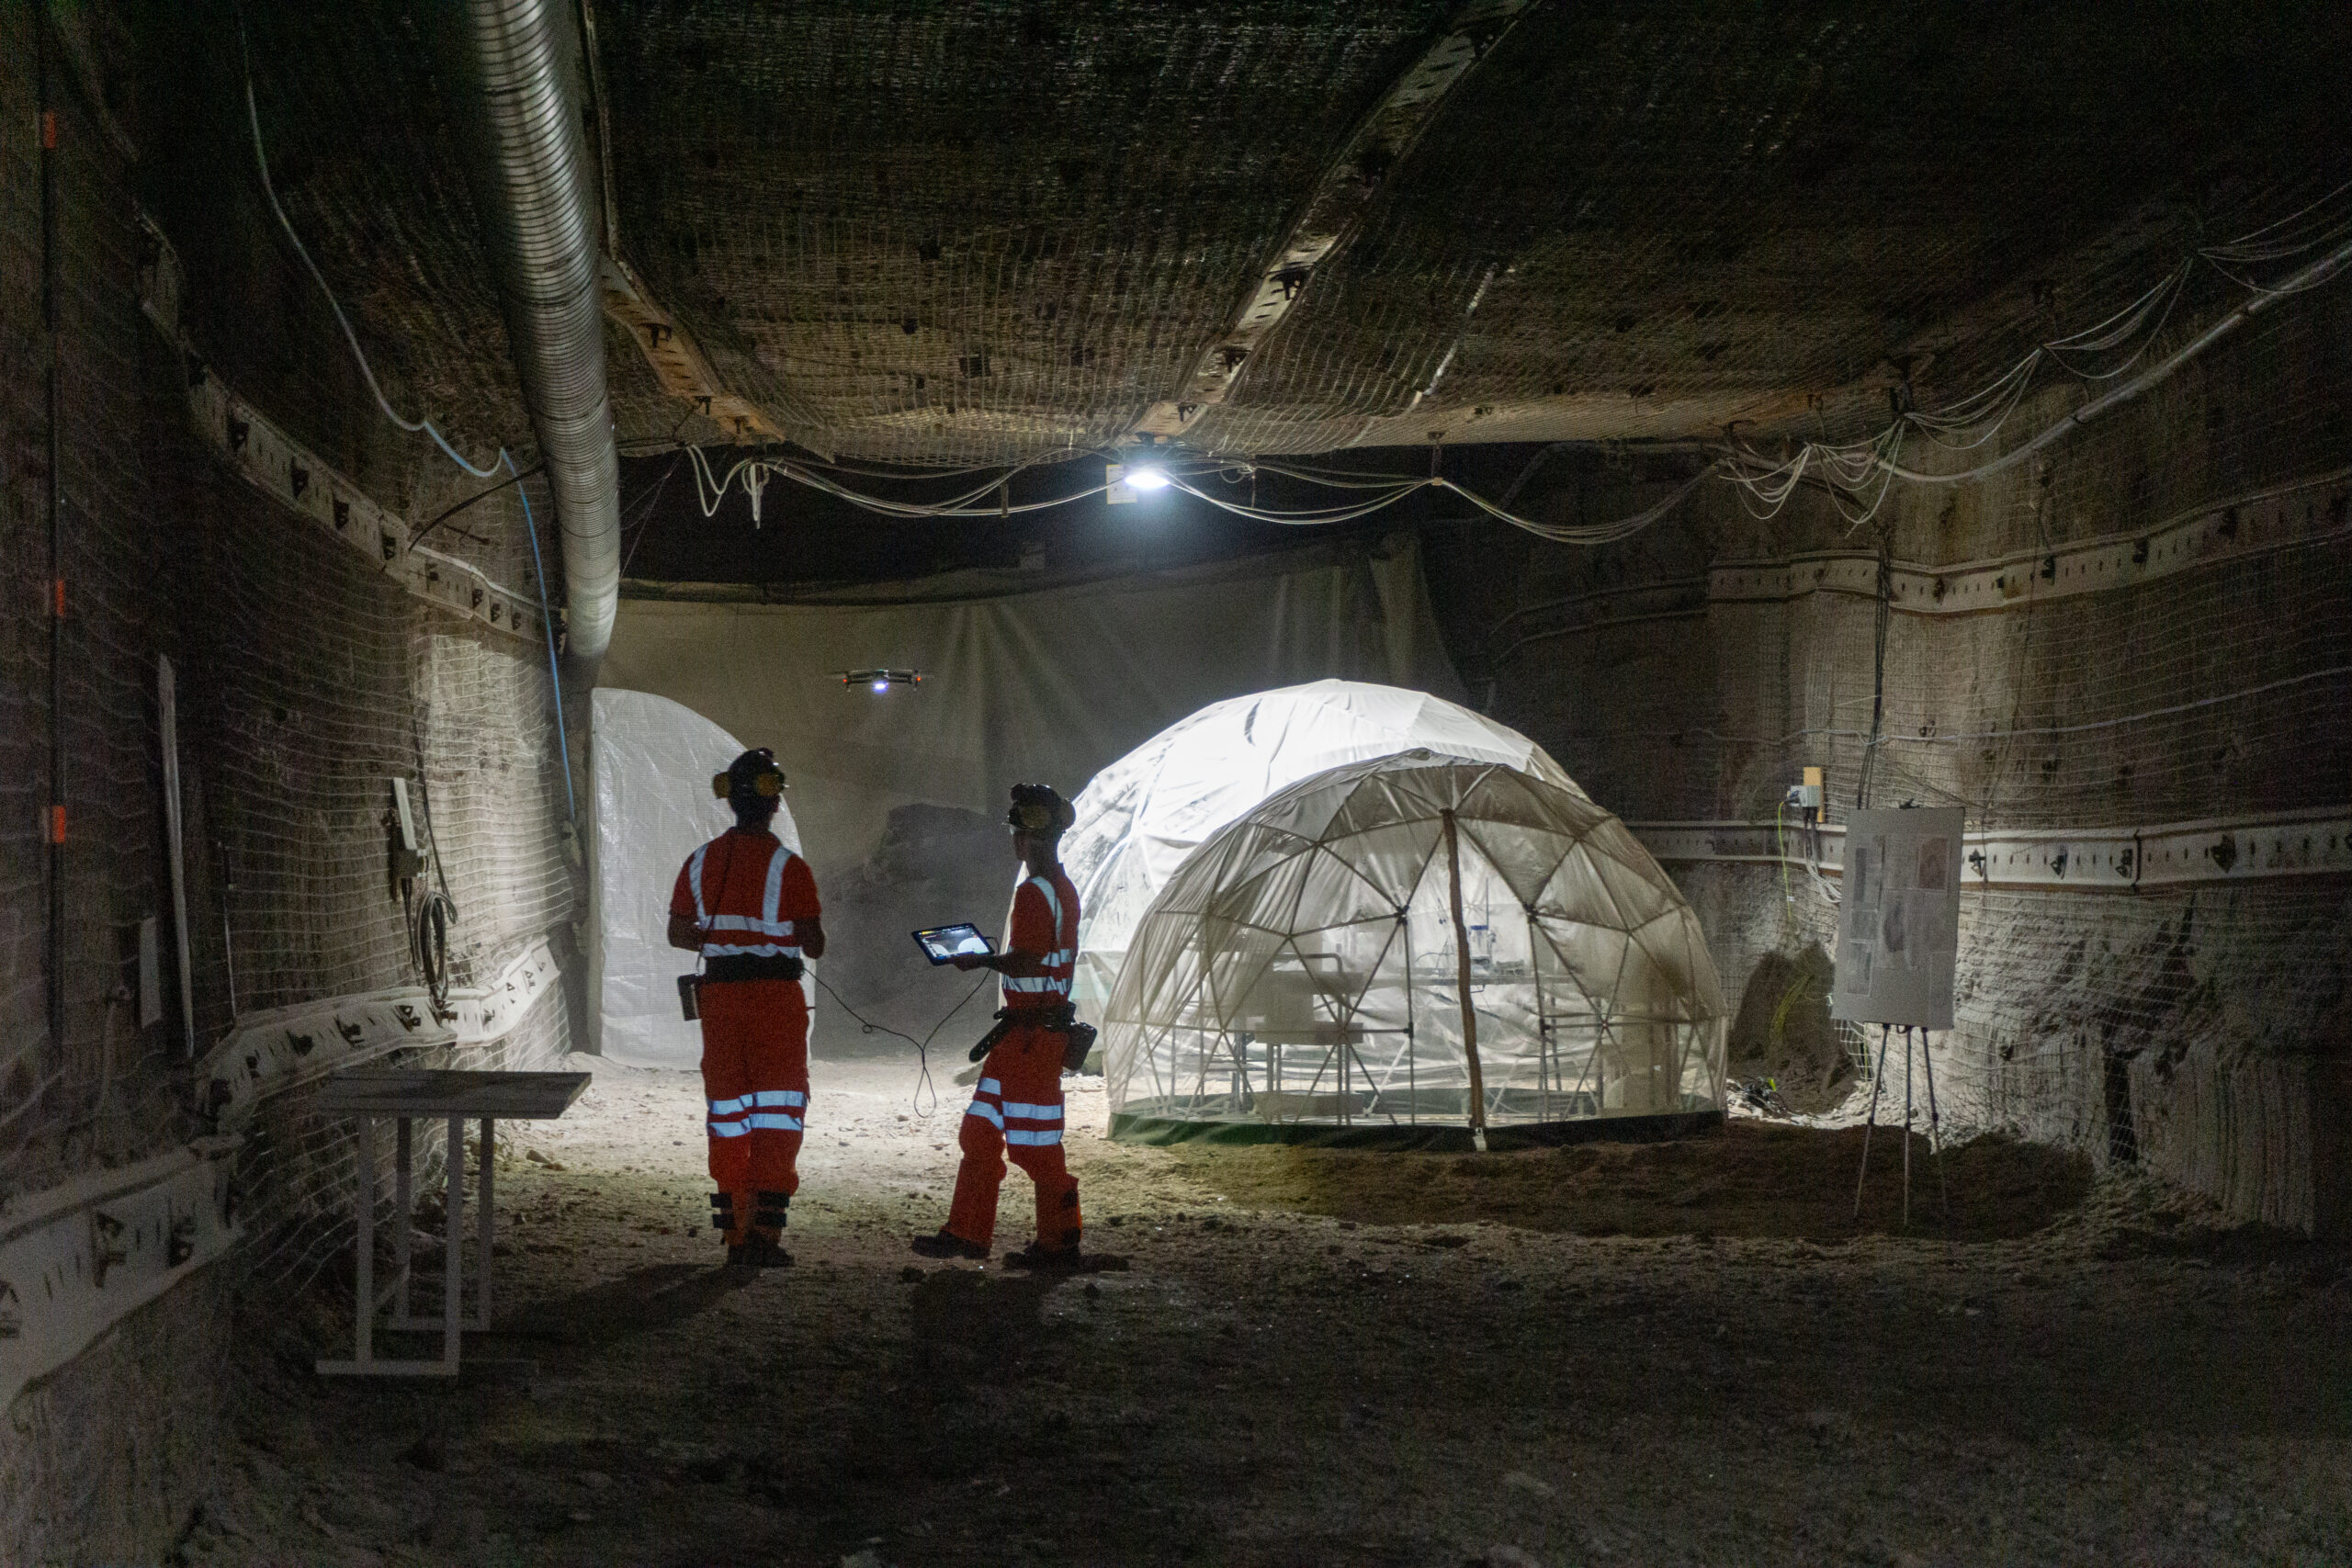 Two researchers flying a drone in one of the underground tunnels